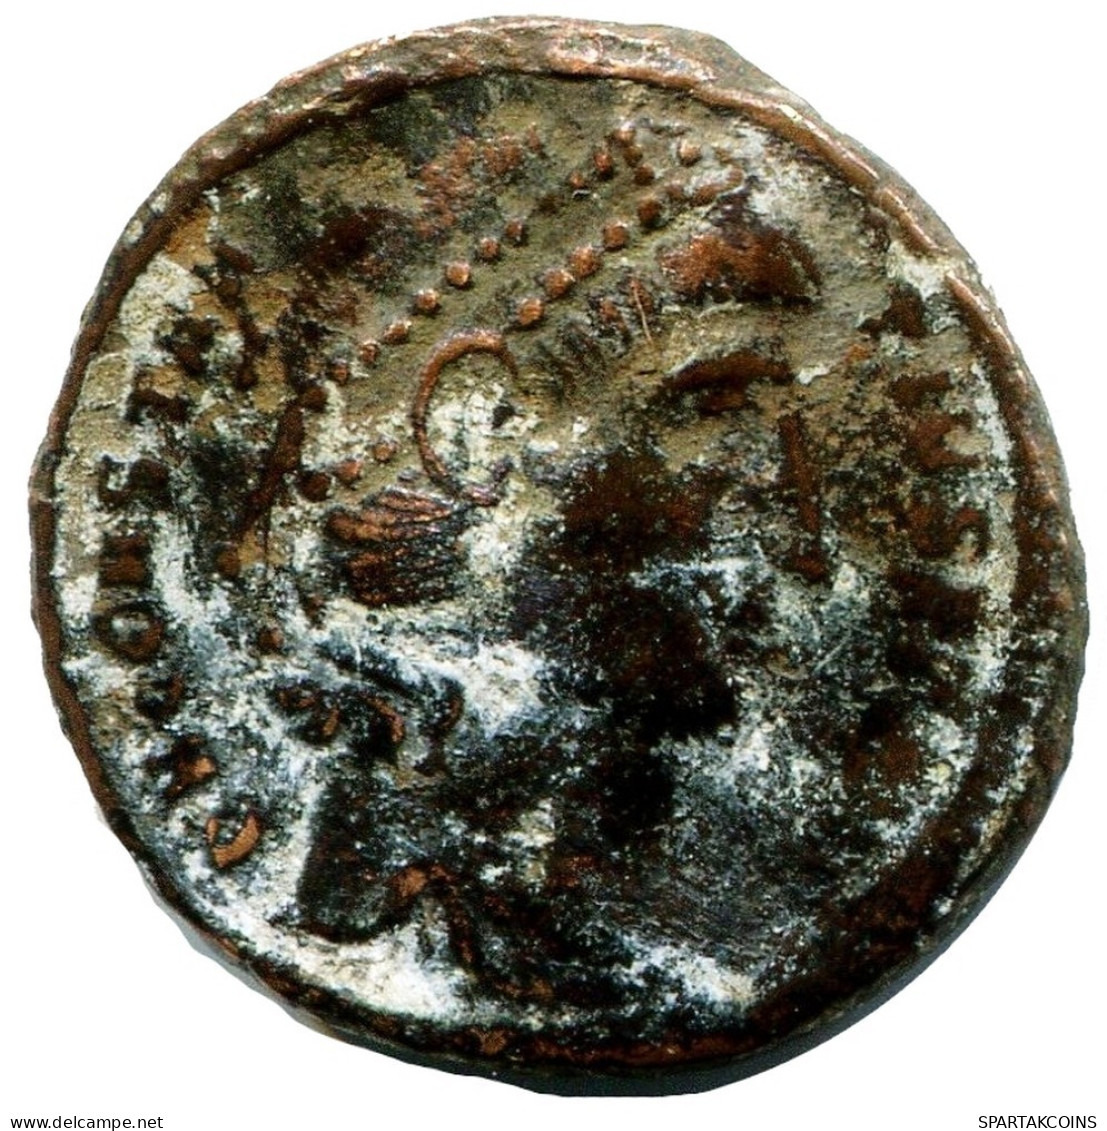 CONSTANTIUS II MINTED IN ANTIOCH FOUND IN IHNASYAH HOARD EGYPT #ANC11232.14.D.A - The Christian Empire (307 AD To 363 AD)